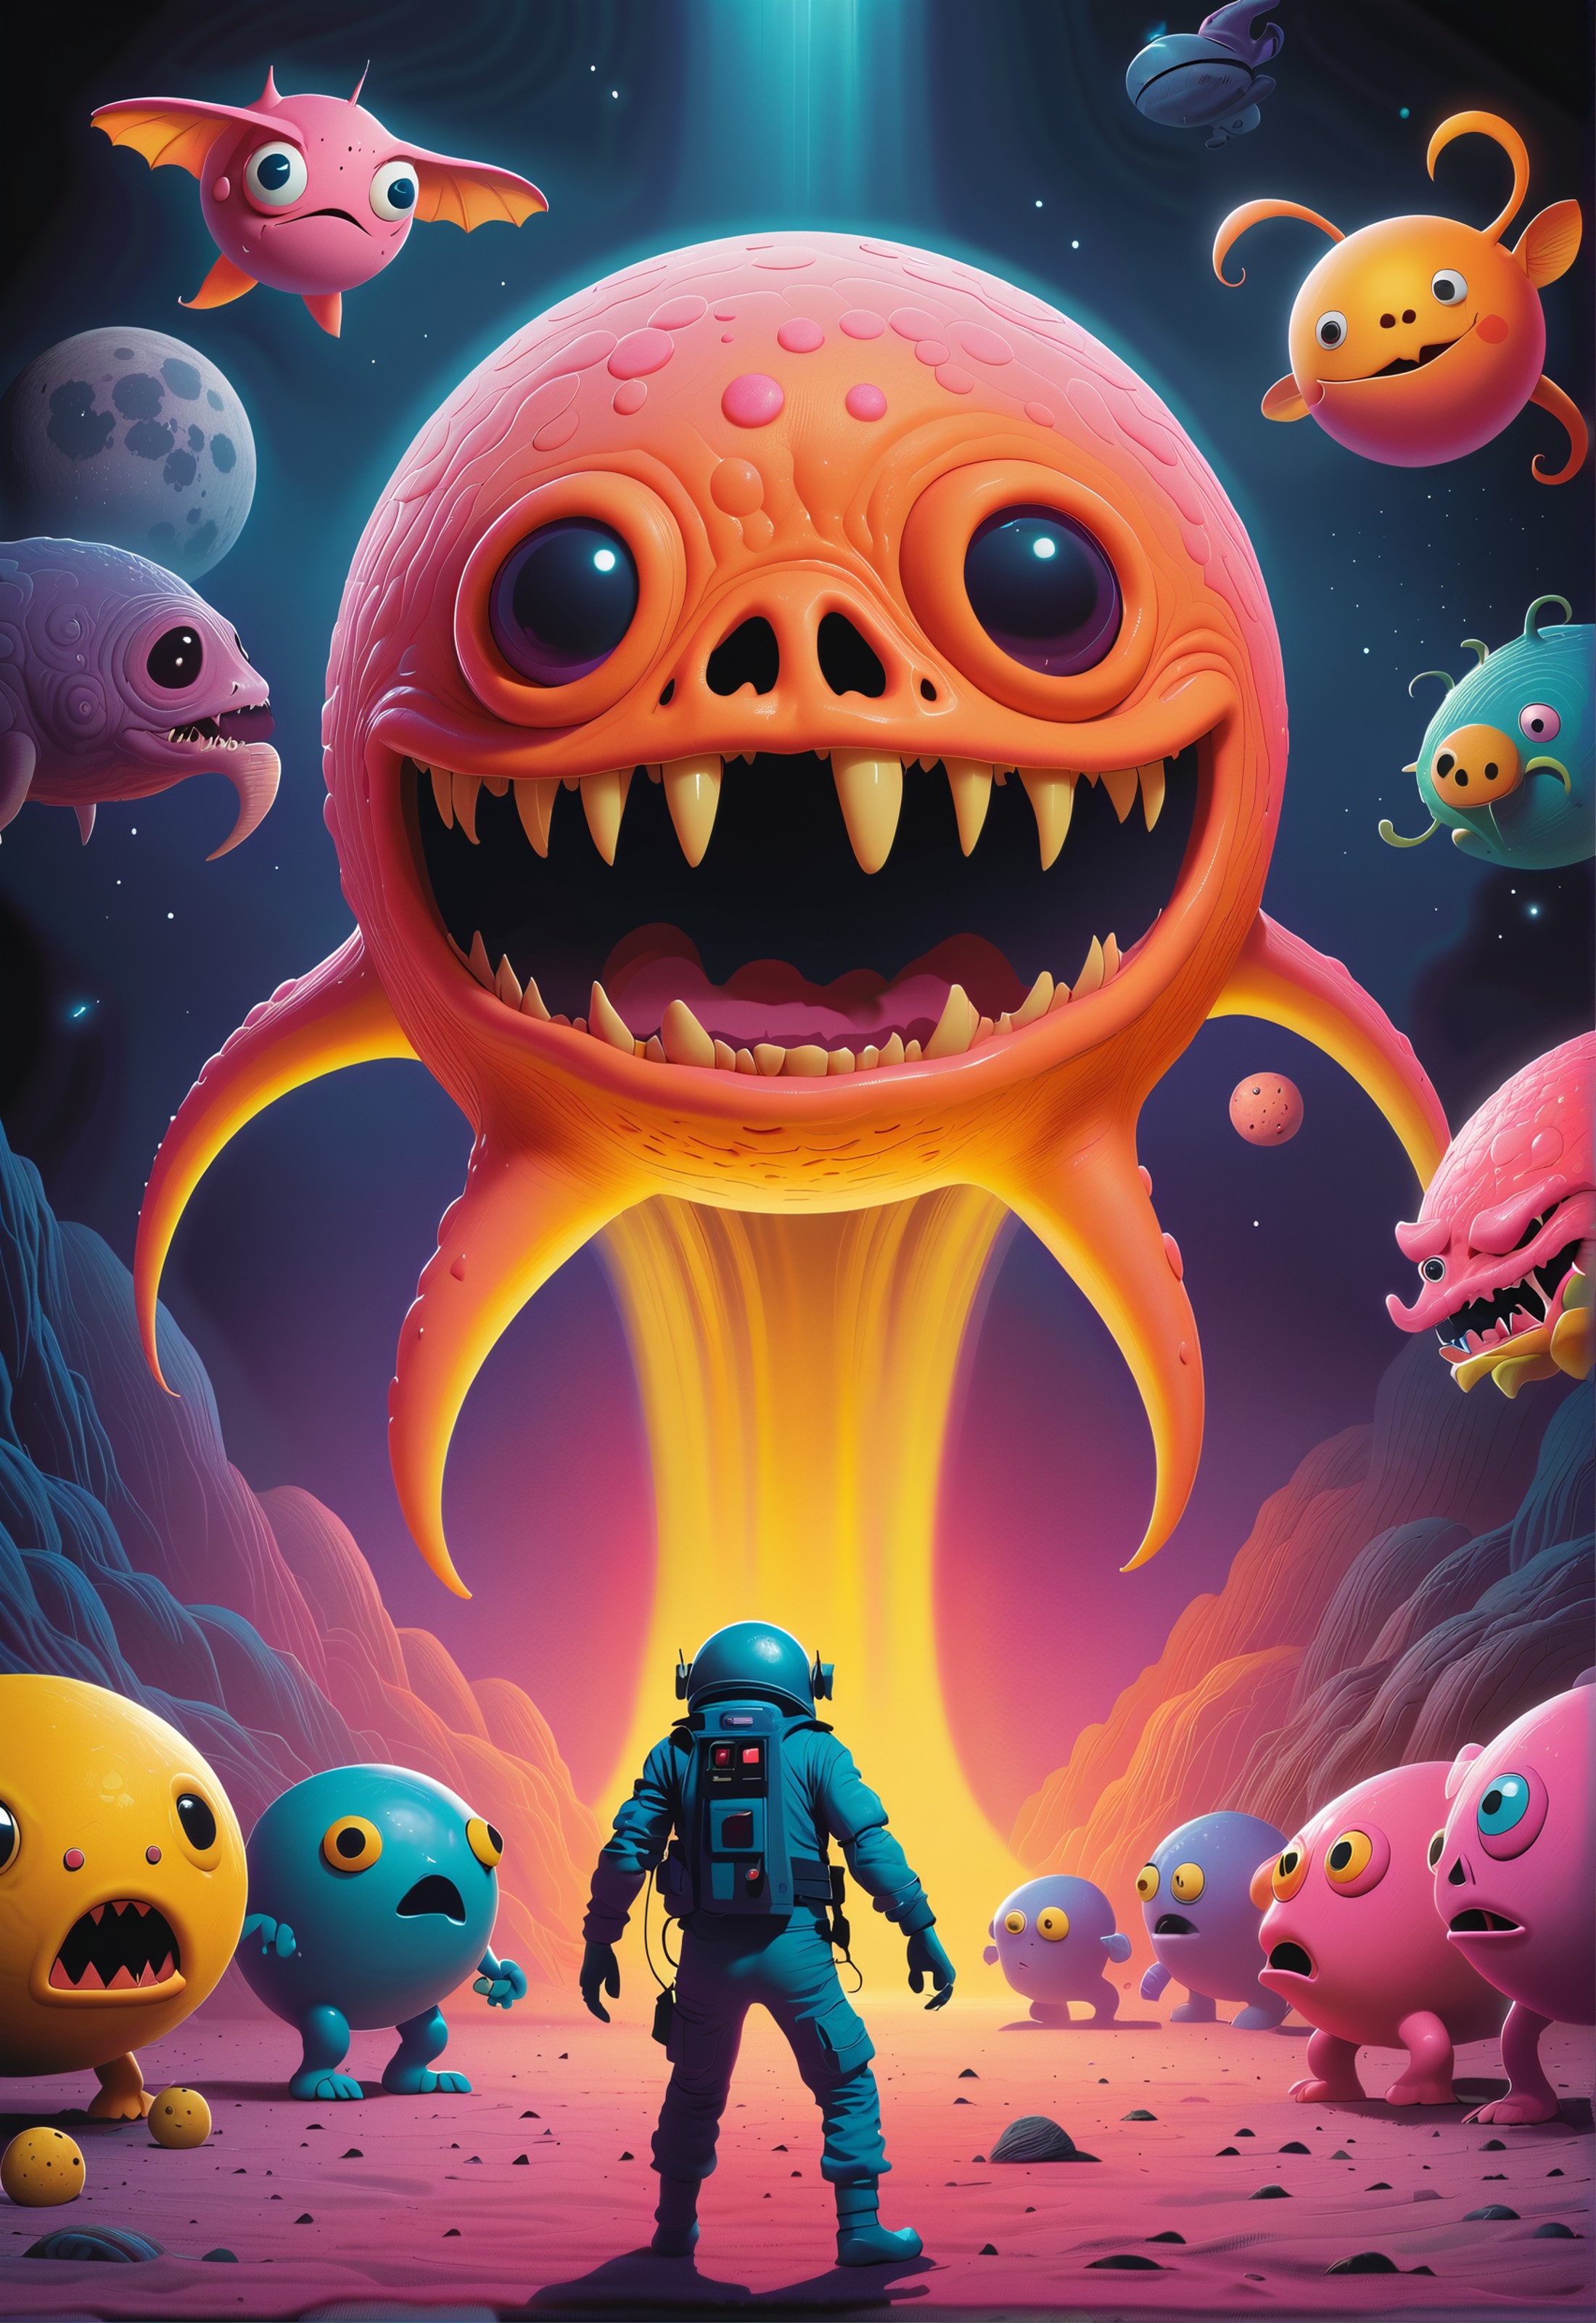 Horror movie still. A single yellow slavering monster pac-man hunts an unsuspecting red, blue, pink and orange astronauts,...